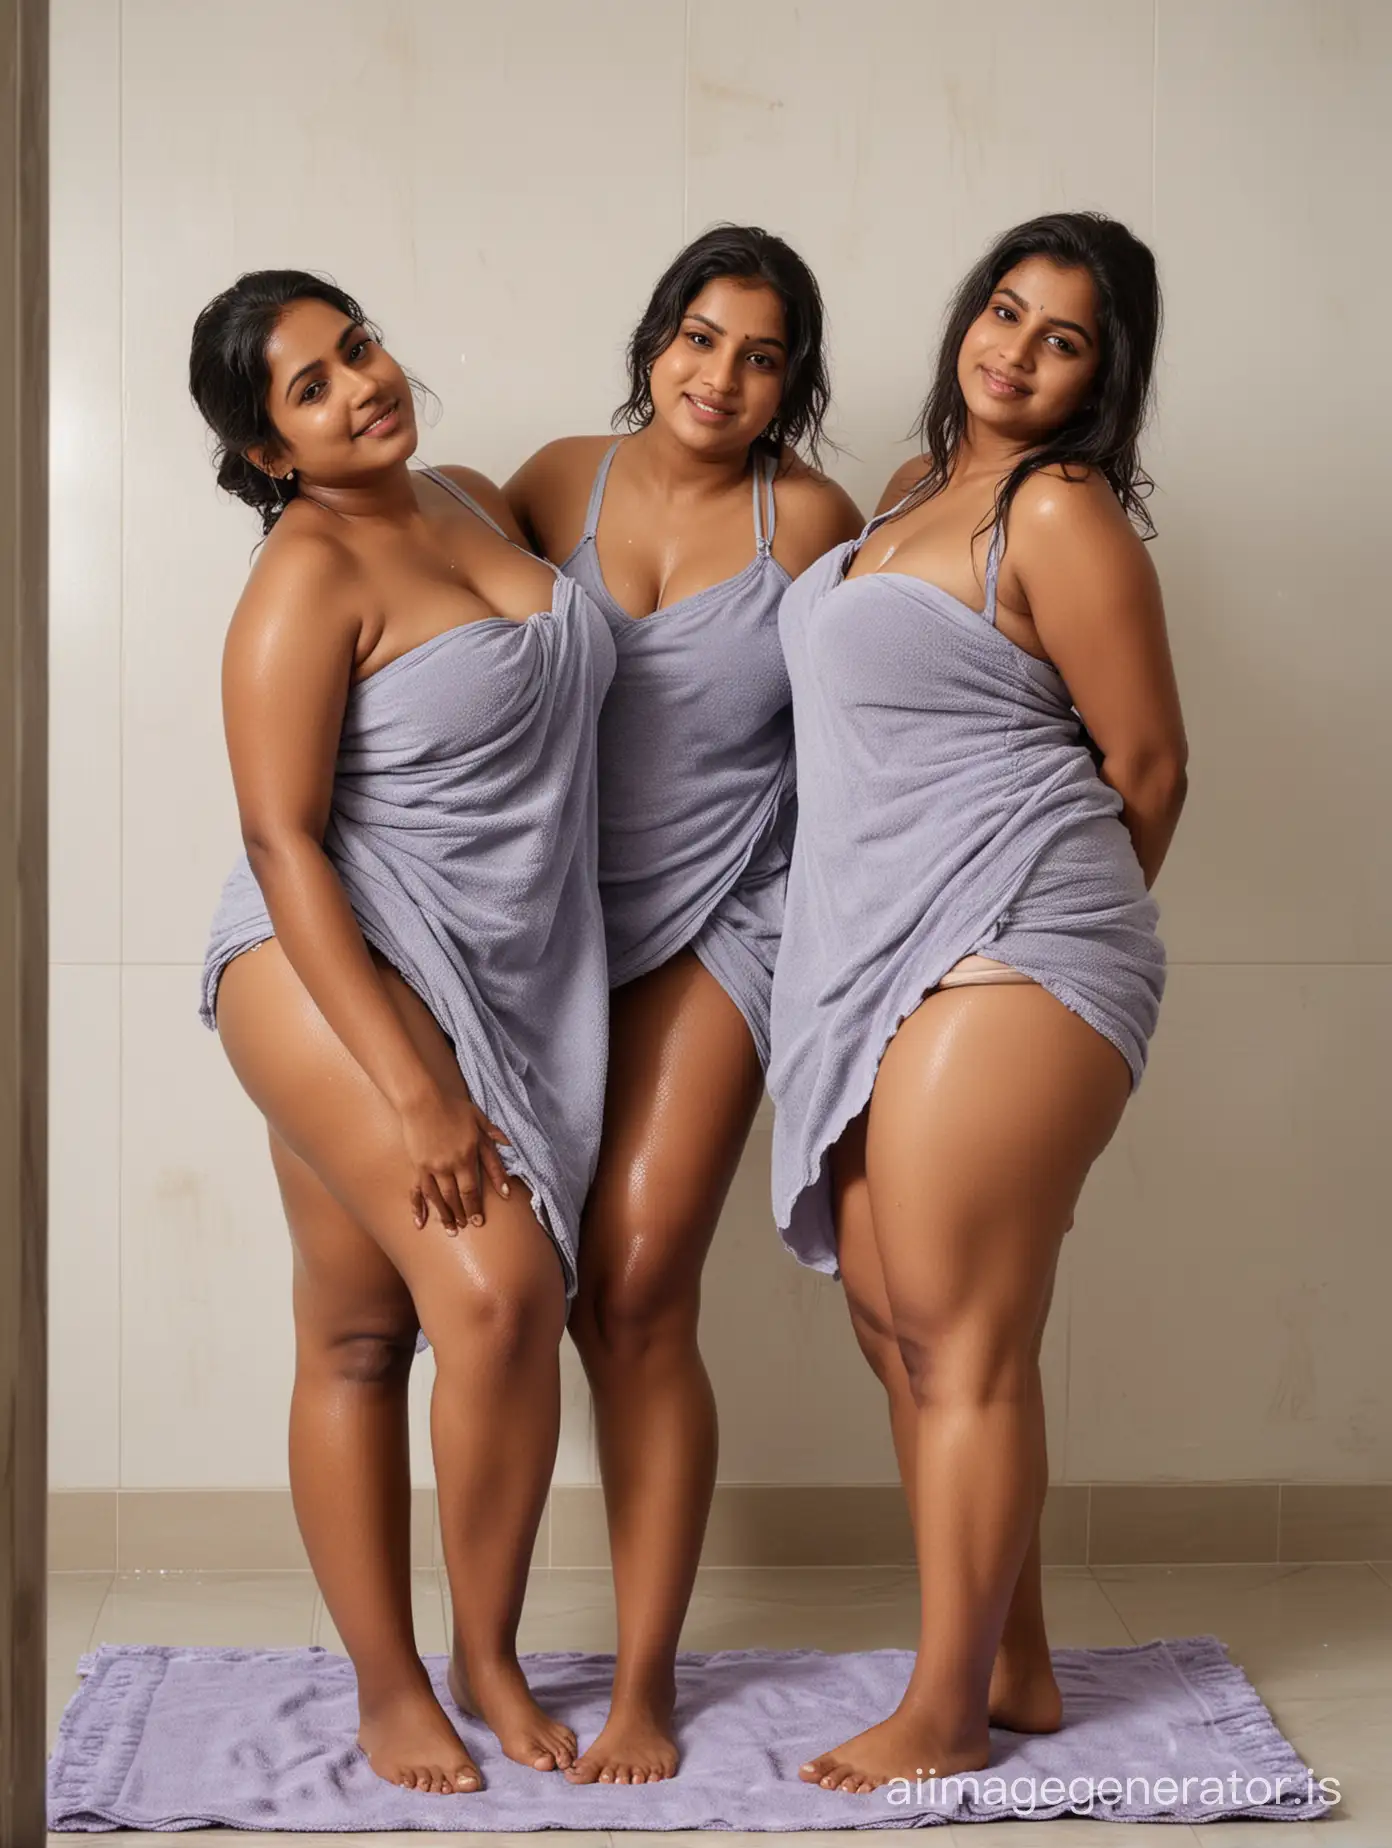 Indian women plus size on towel in room after getting wet in water posing to get intimate